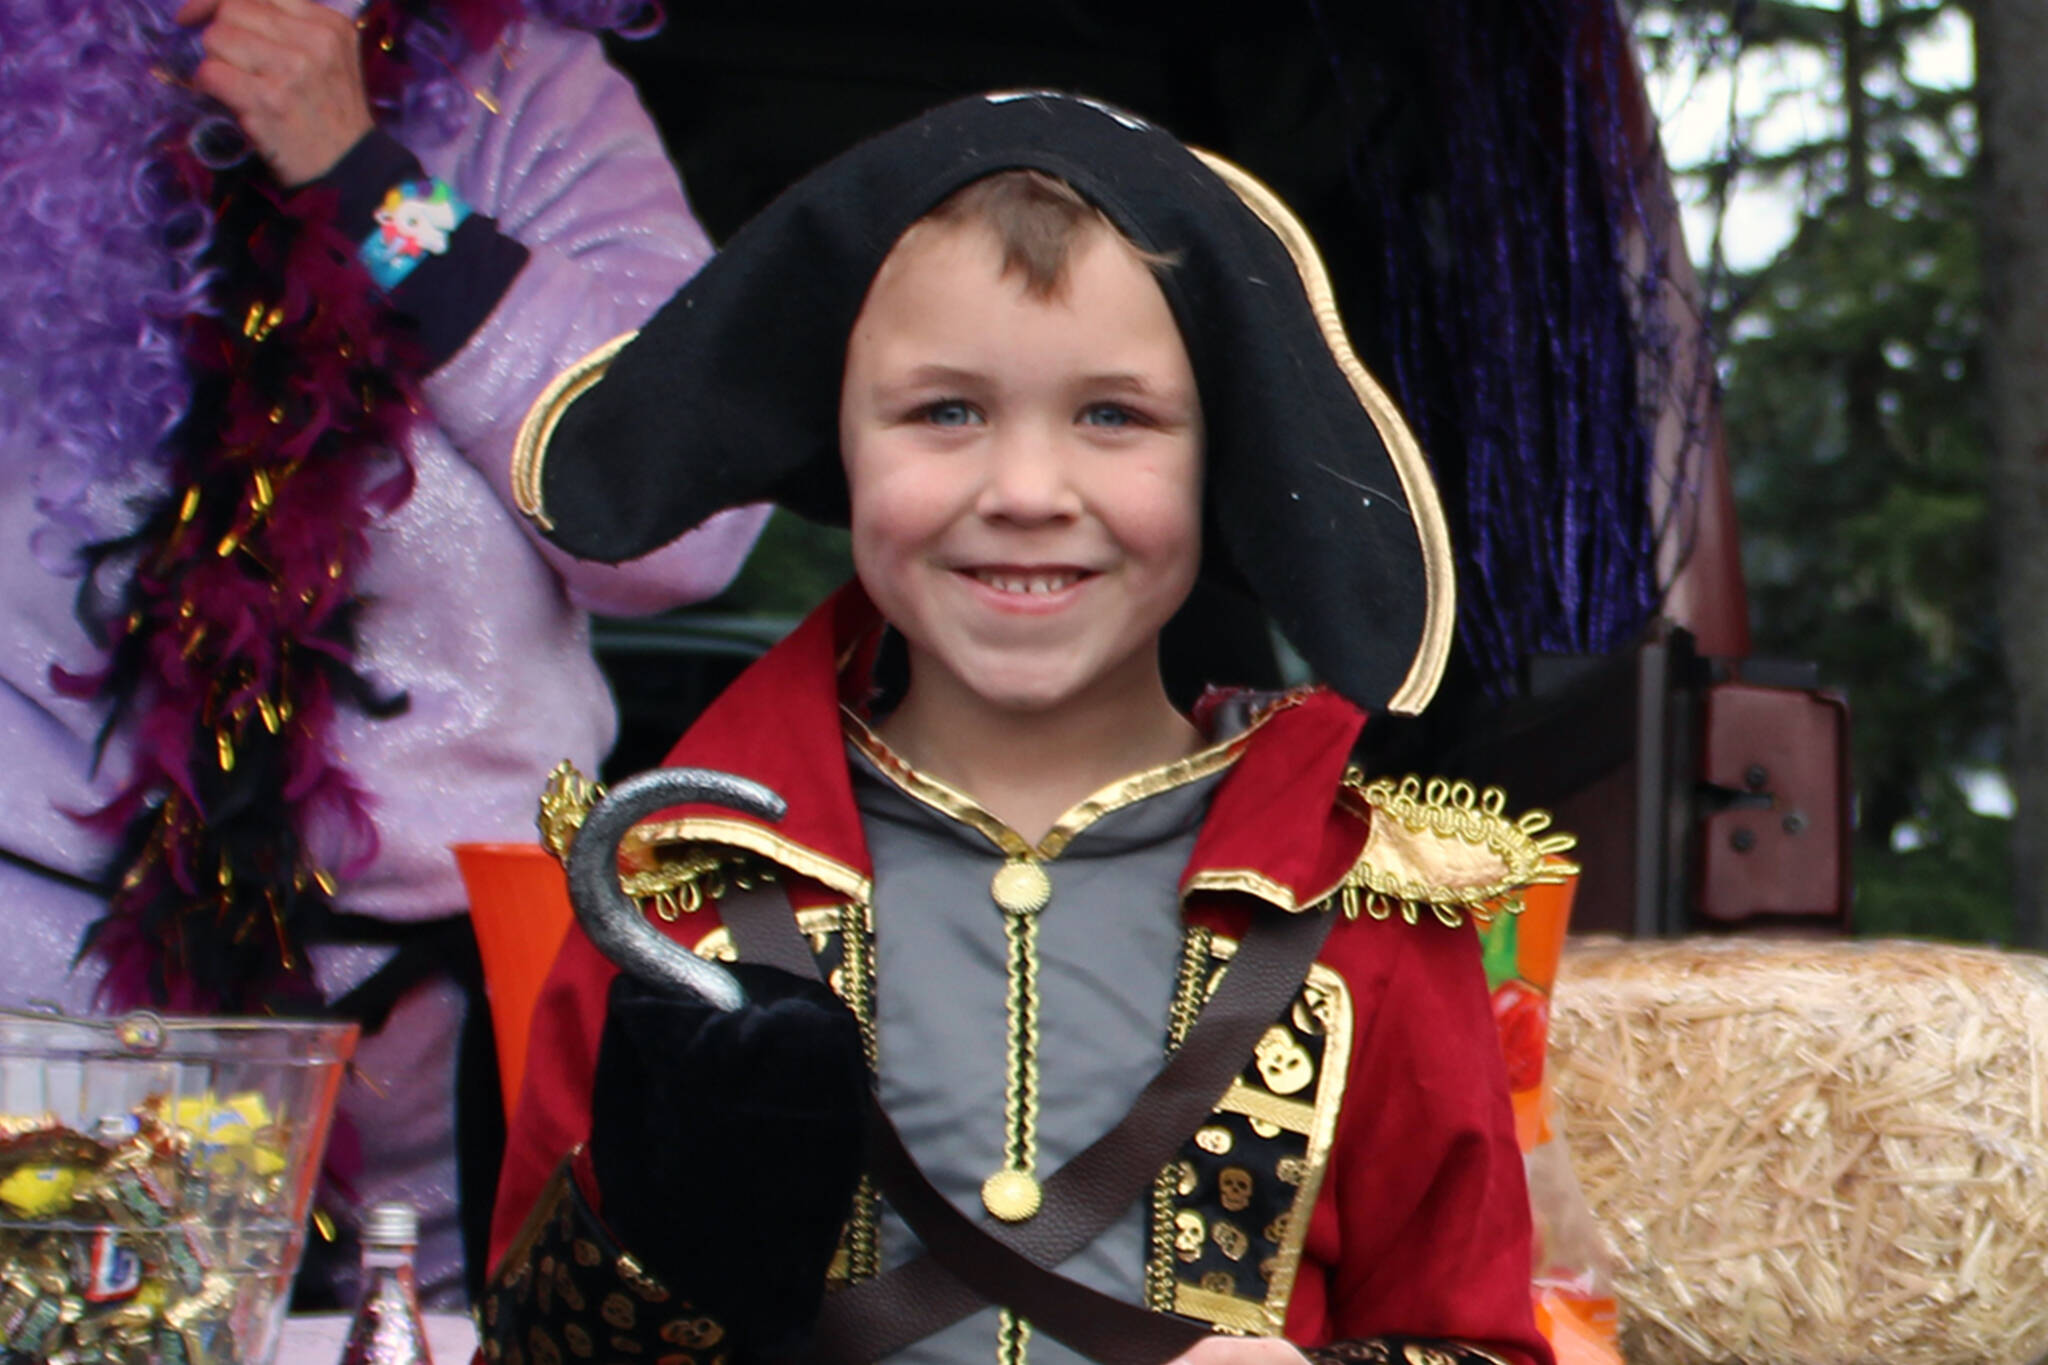 Five-year-old Leighton Howard has a swashbuckling good time trunk-or-treating on Saturday, Oct. 30 at Chapel by the Lake. (Dana Zigmund/Juneau Empire)